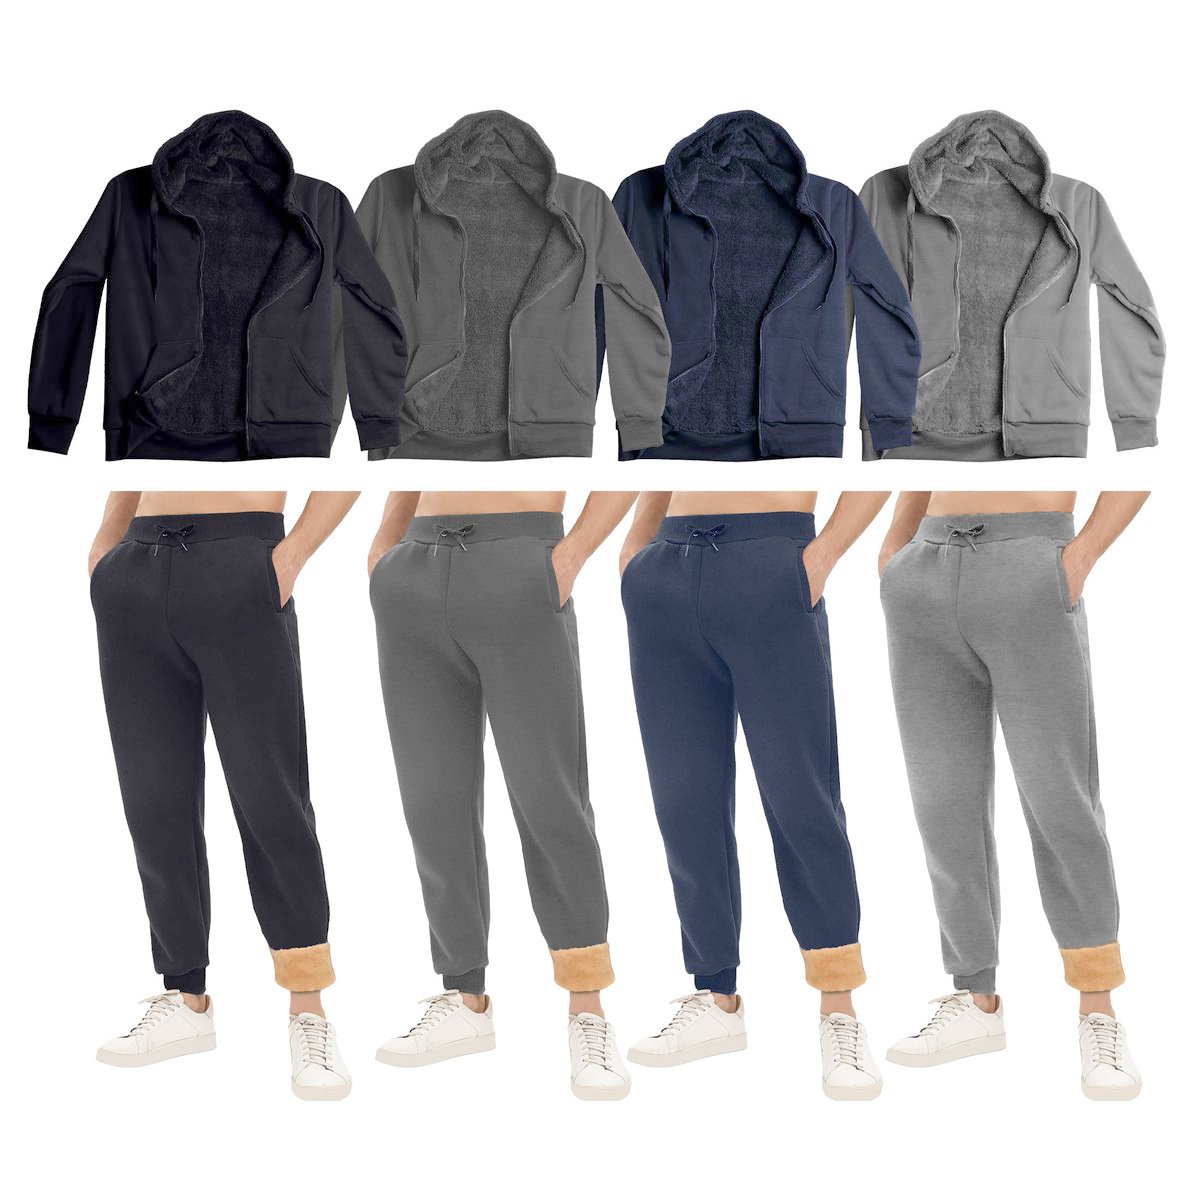 2-Pack: Men's Big & Tall Casual Super Soft Winter Warm Thick Sherpa Lined Sweatsuit Jogger Set - Grey, X-large